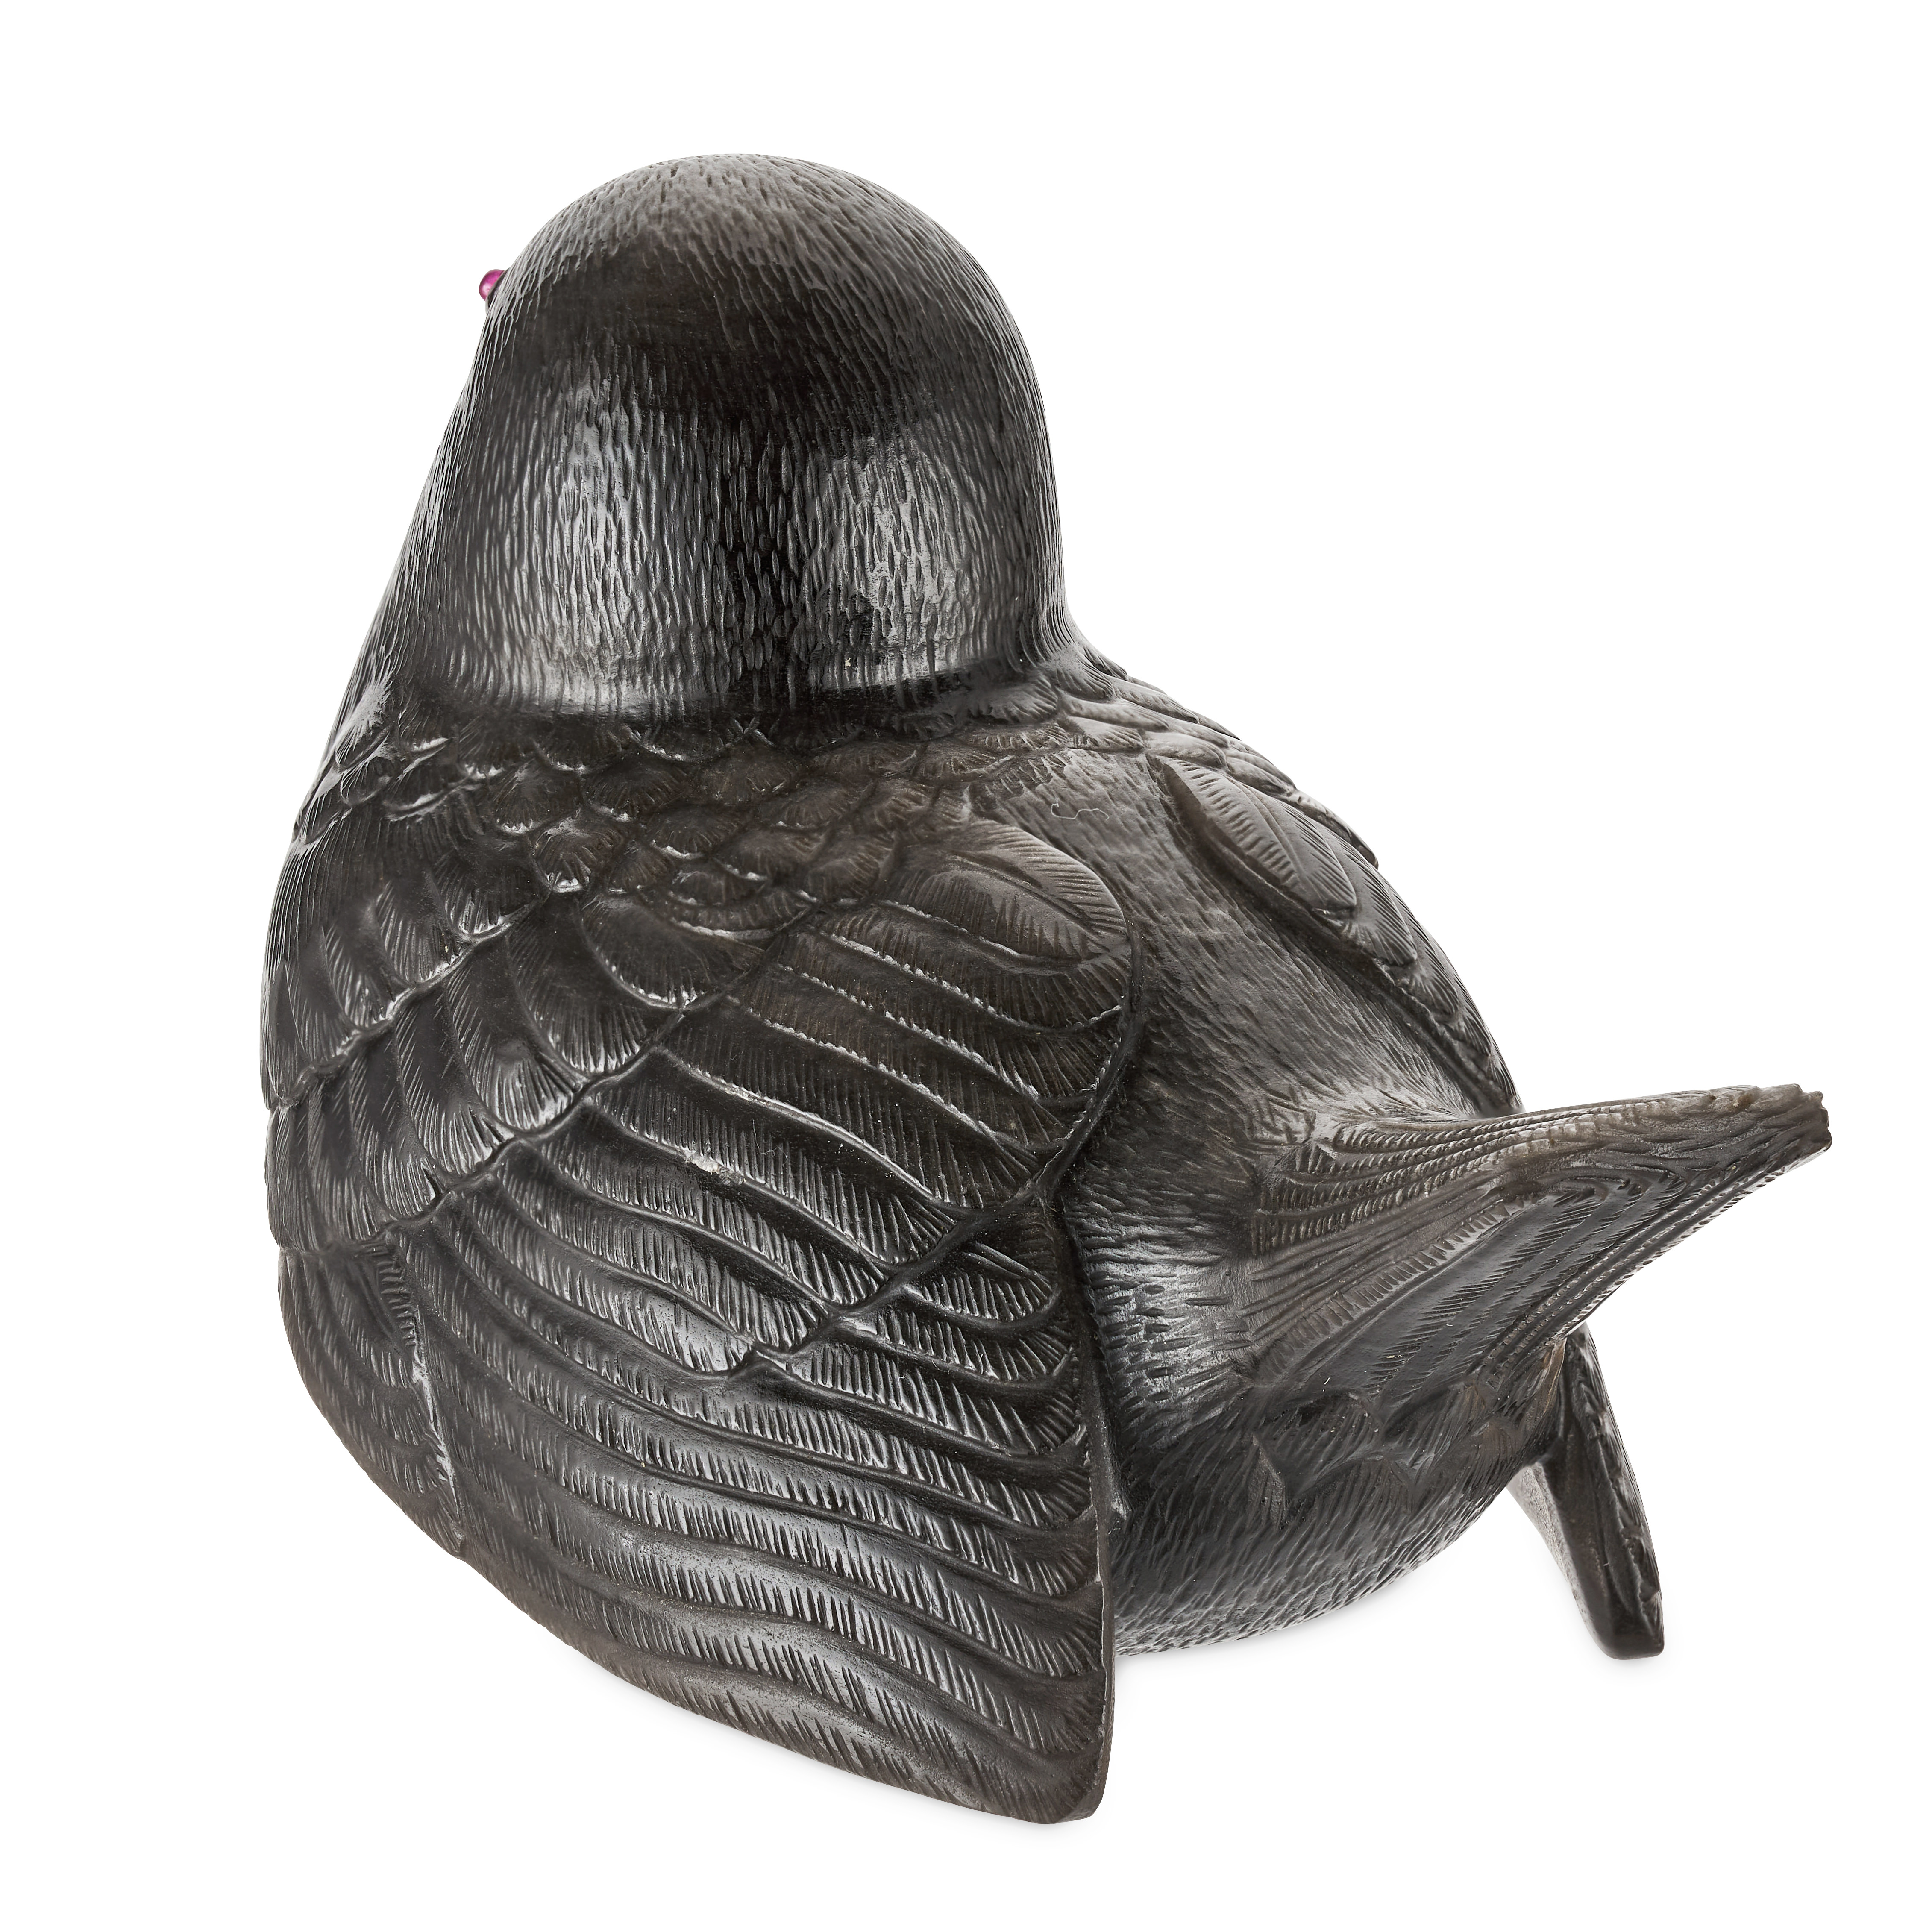 FABERGE, A LARGE AND IMPORTANT JEWELLED OBSIDIAN STUDY OF A DUSTBATHING SPARROW, ST PETERSBURG, C... - Image 6 of 13